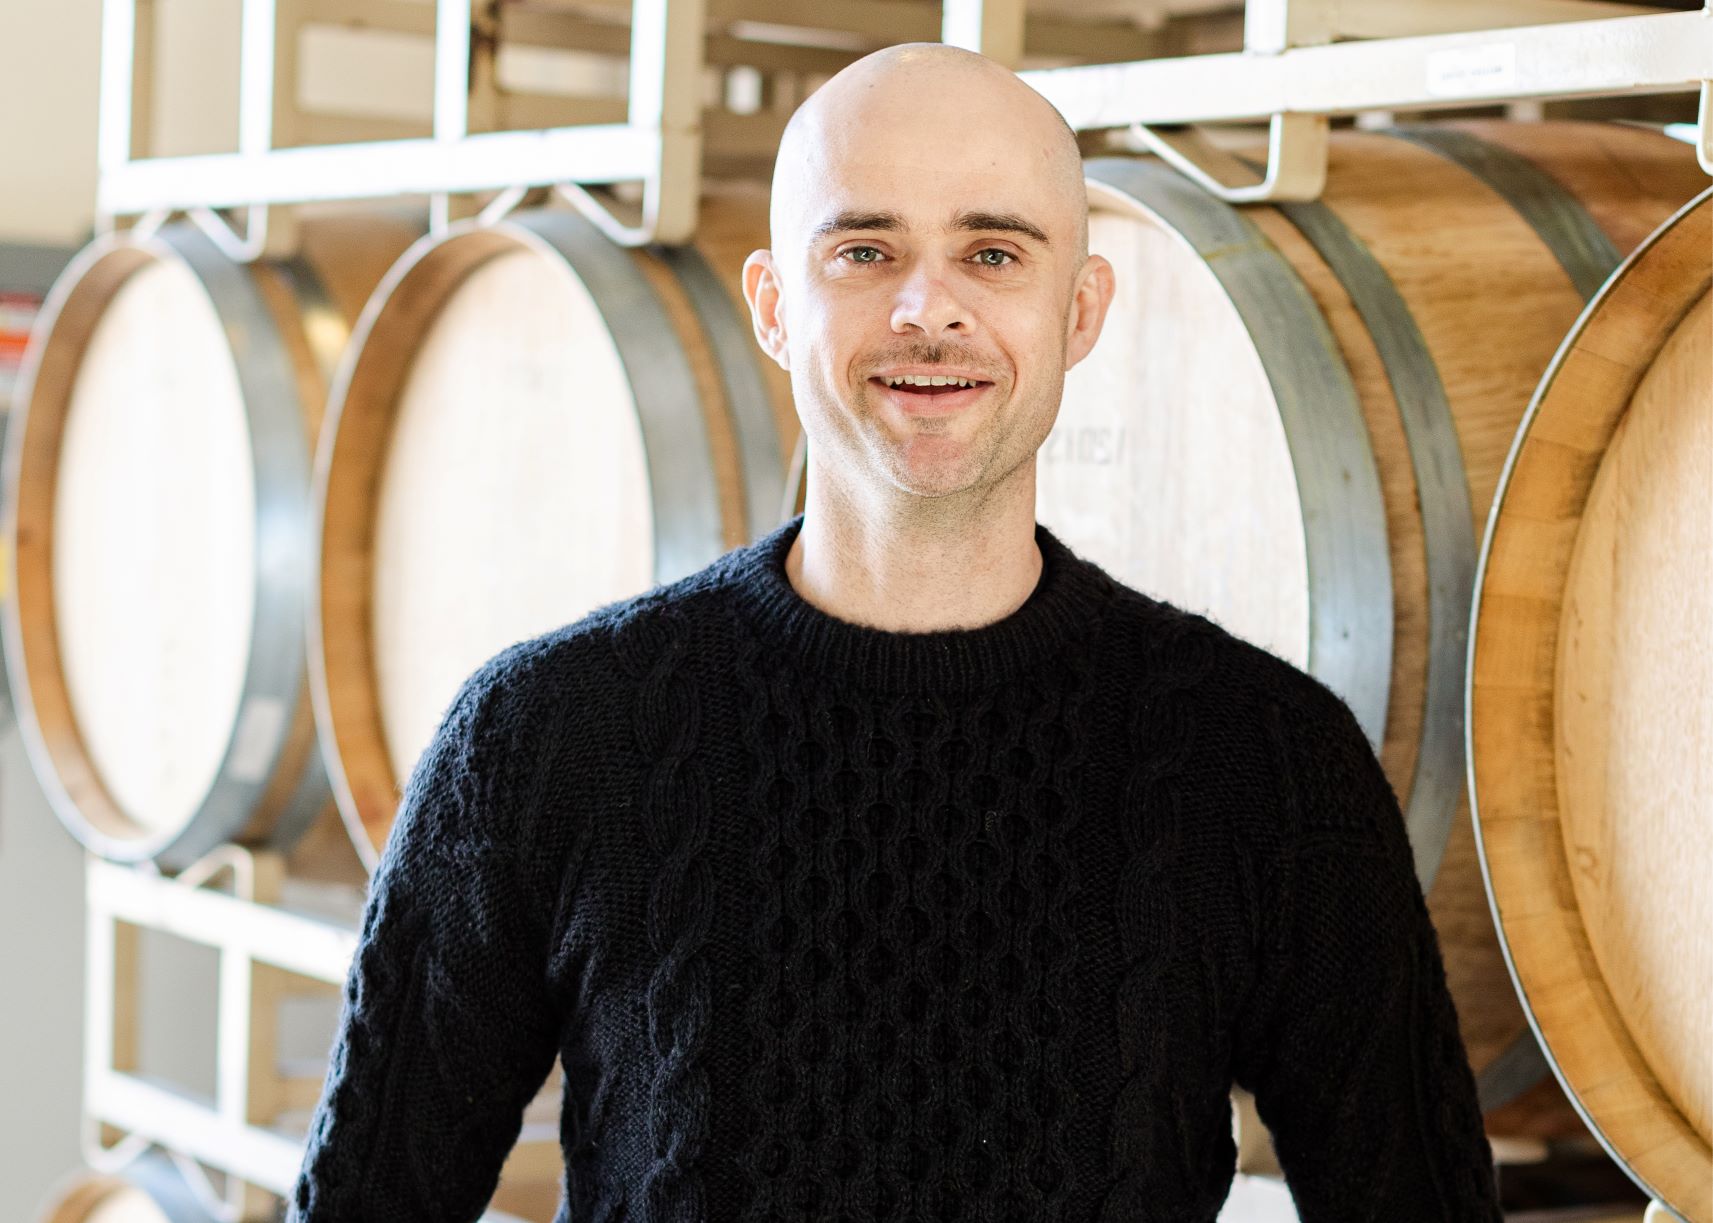 2018 - The Derby’s hire Sean Geoghegan as Winemaker for the Estate. Sean’s previous experience working from vine to bottle at Mount Eden Vineyards in the Santa Cruz mountains made him a perfect fit for the small team at Derby, where being up to your elbows in every step of the process (from harvest all the way through to the bottle) is a must. Sean’s winemaking style is modern, elegant and brings a sophistication to the wines that shows in every blend and single varietal we produce under the Derby Wine Estates label.
